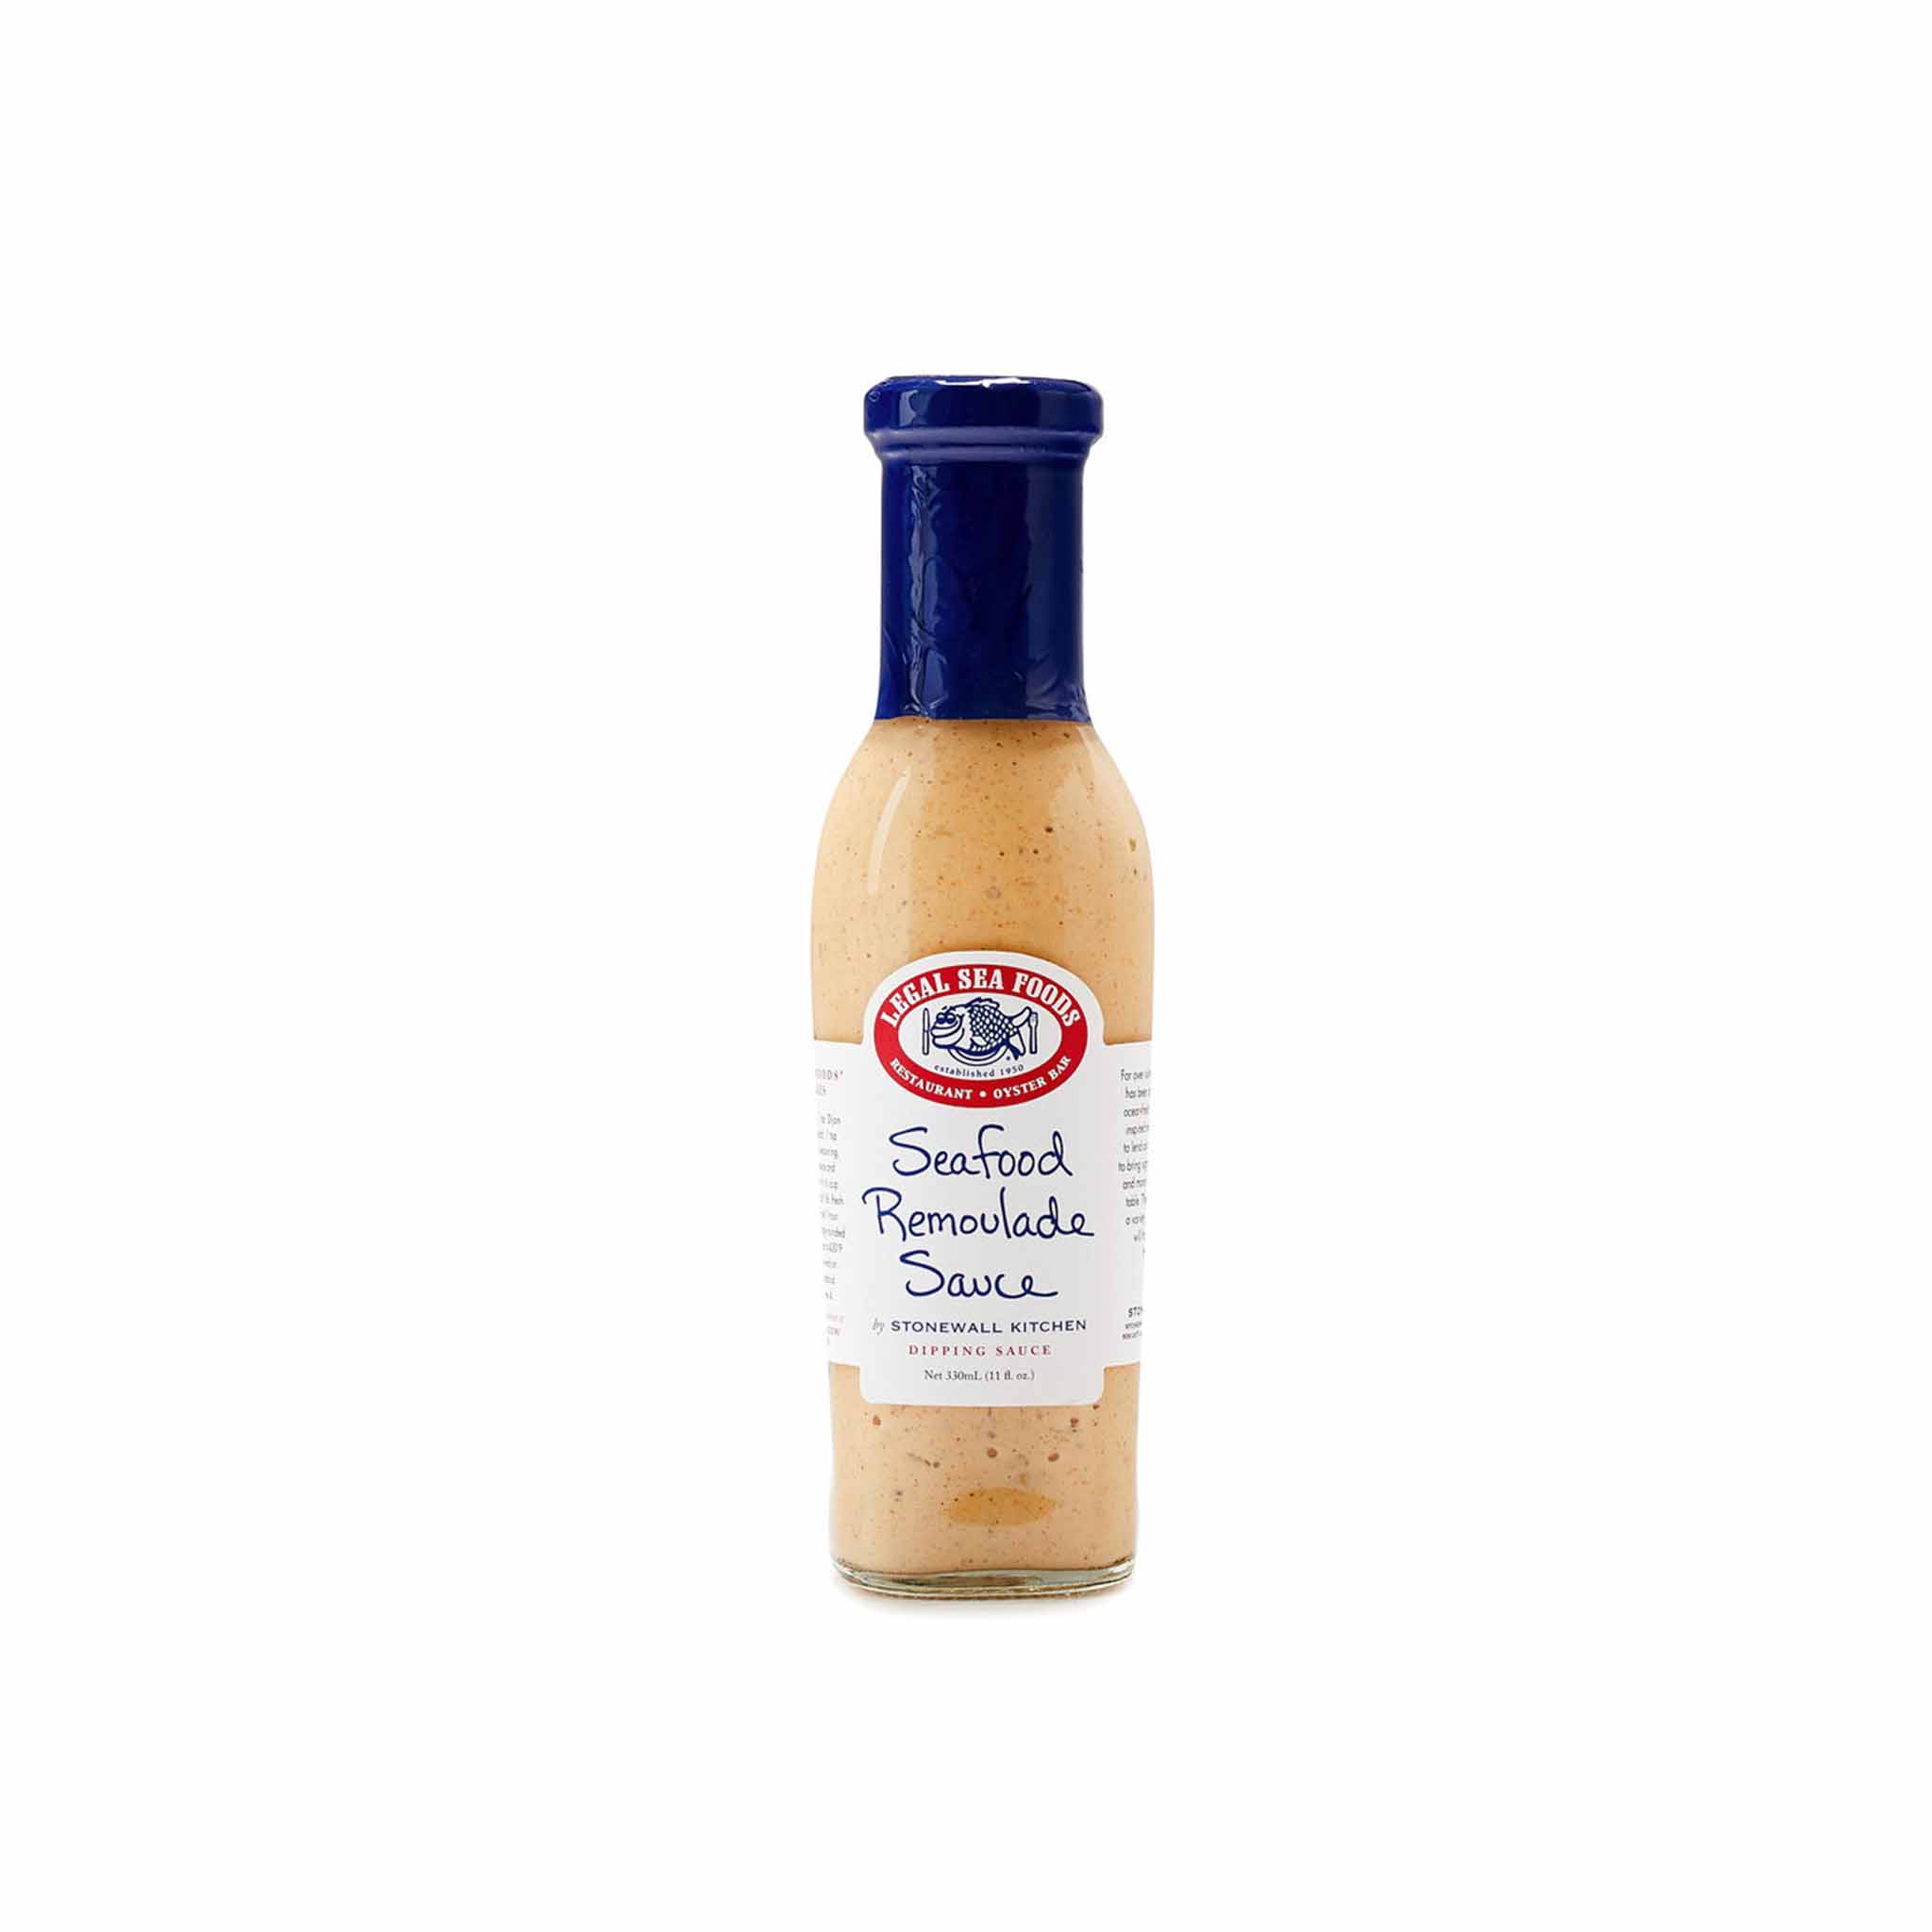 LEGAL SEAFOOD REMOULADE SAUCE 11.8oz